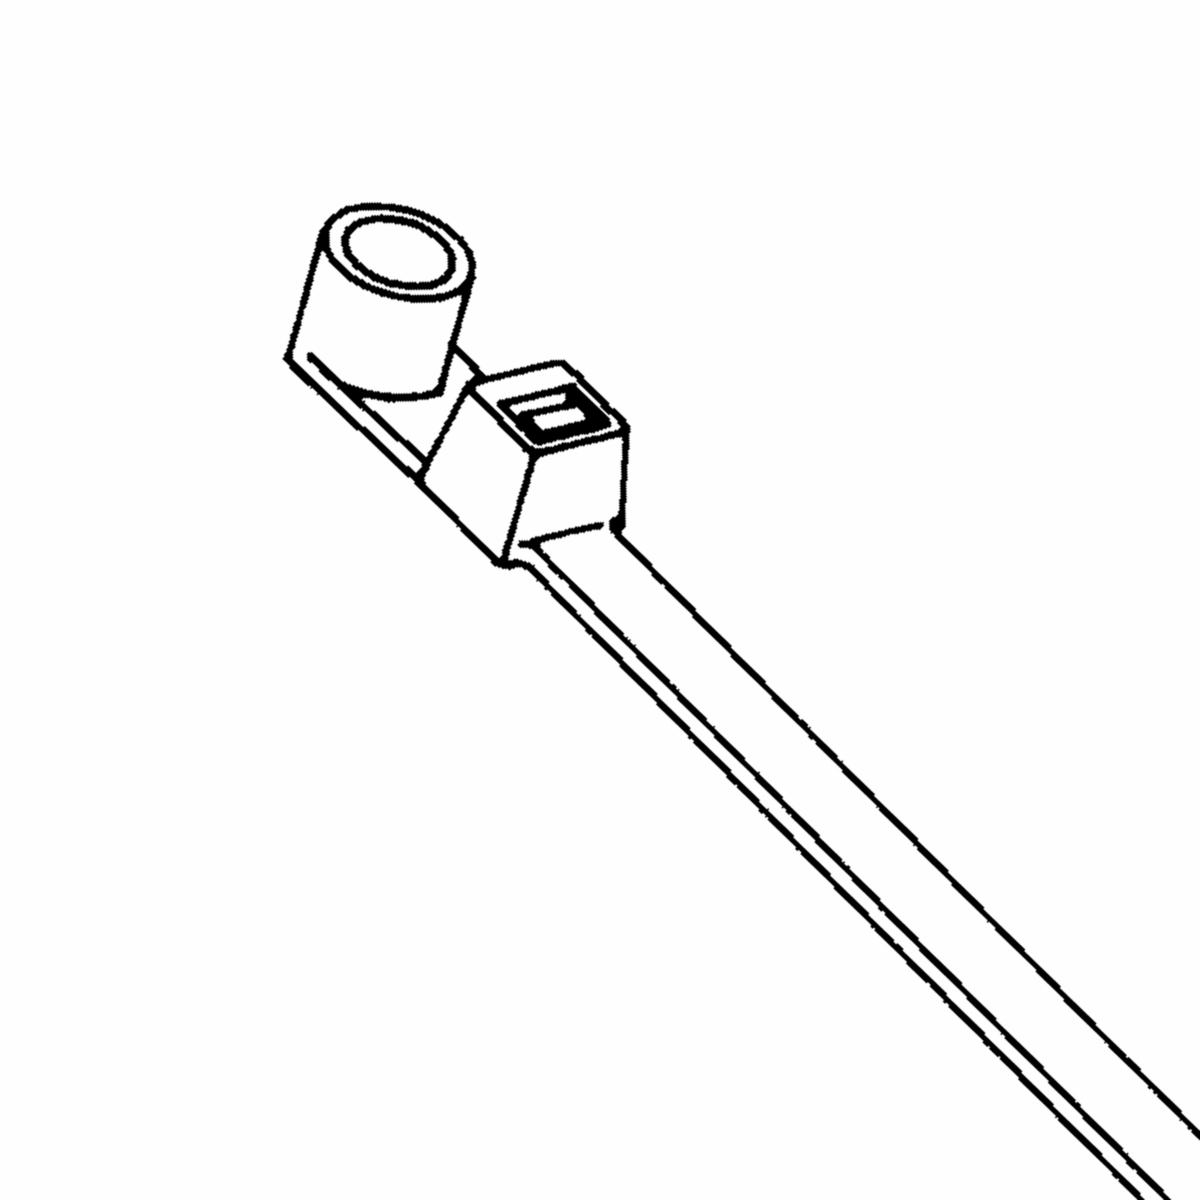 Hubbell CT120400MH14L Nylon Natural Screw Mounting Cable Tie.  ; Mounting Hole ; Features: Cable Ties for General Use Available in Black or Natural, One piece injection molded, Installation Tool: MK9 Tool, Stud Size: 1/4 IN (M6)